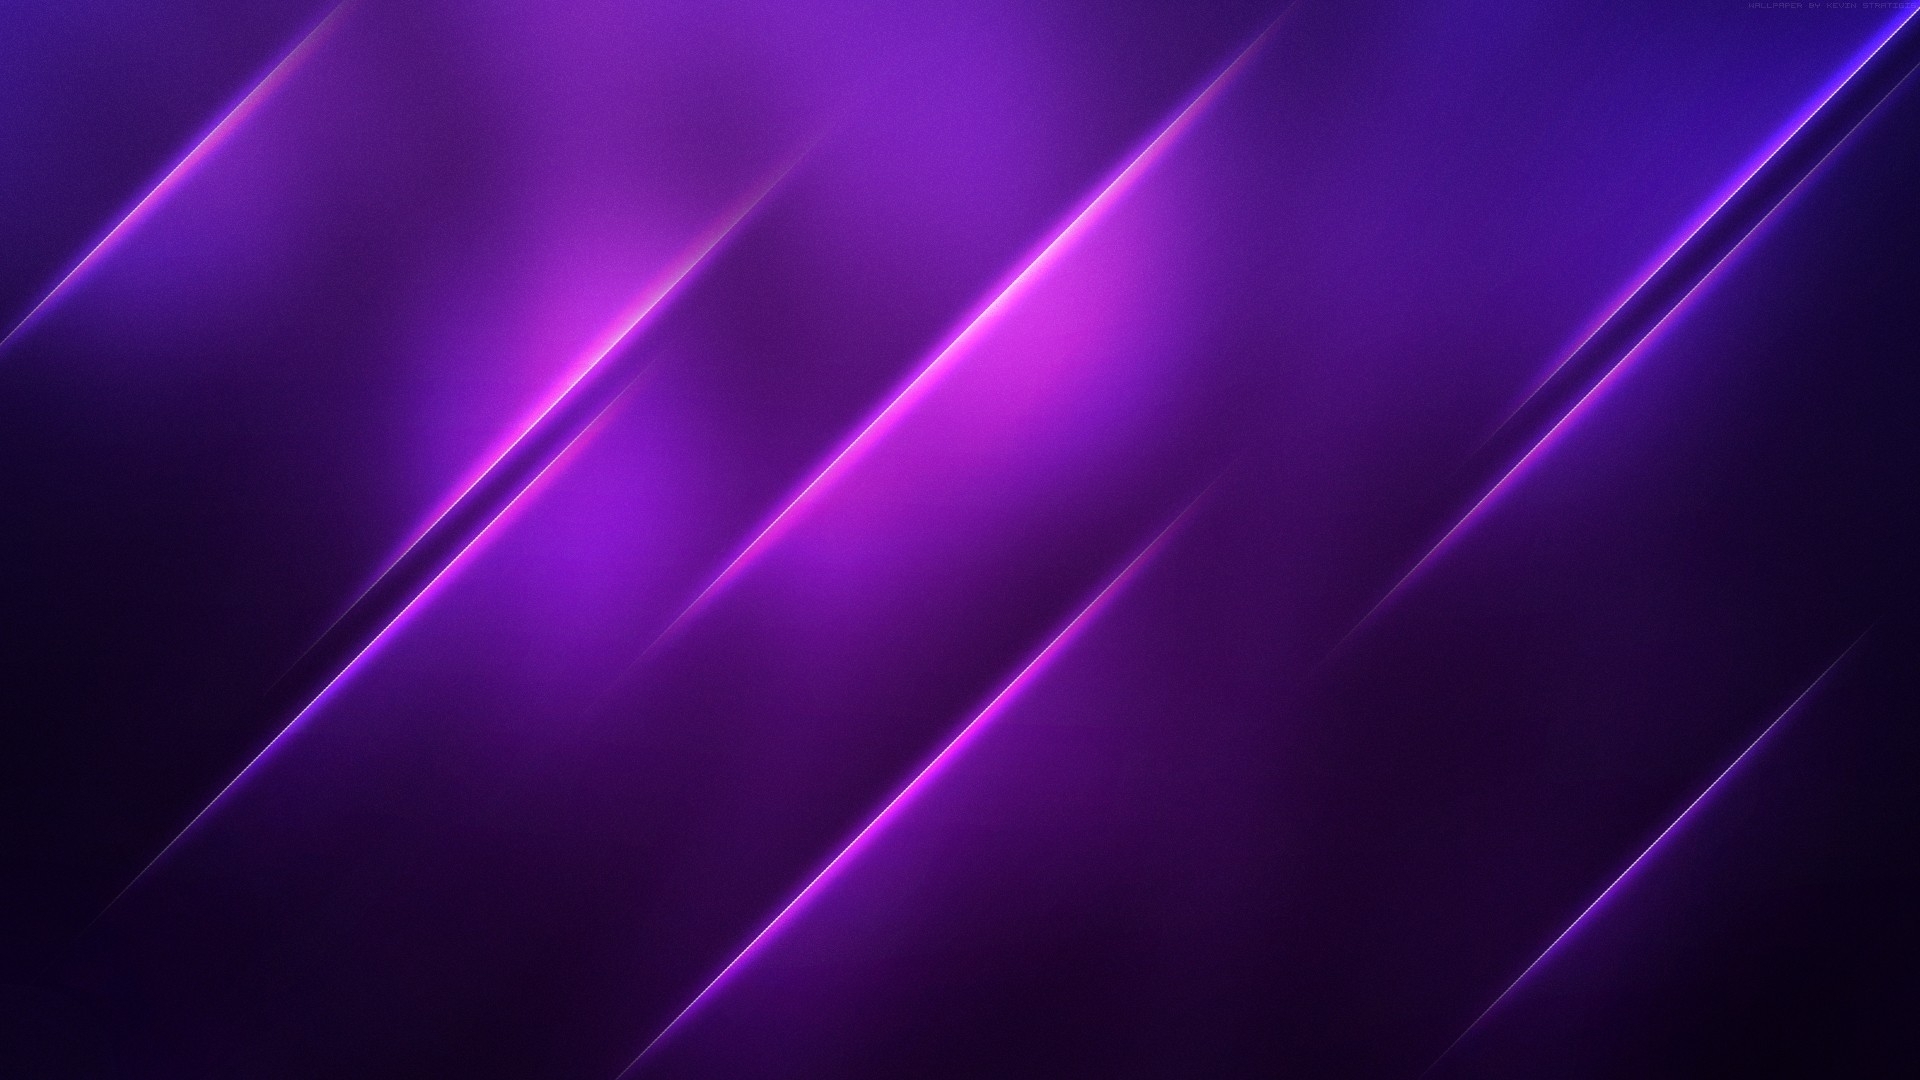 Solid Purple Backgrounds wallpaper Solid Purple Backgrounds hd